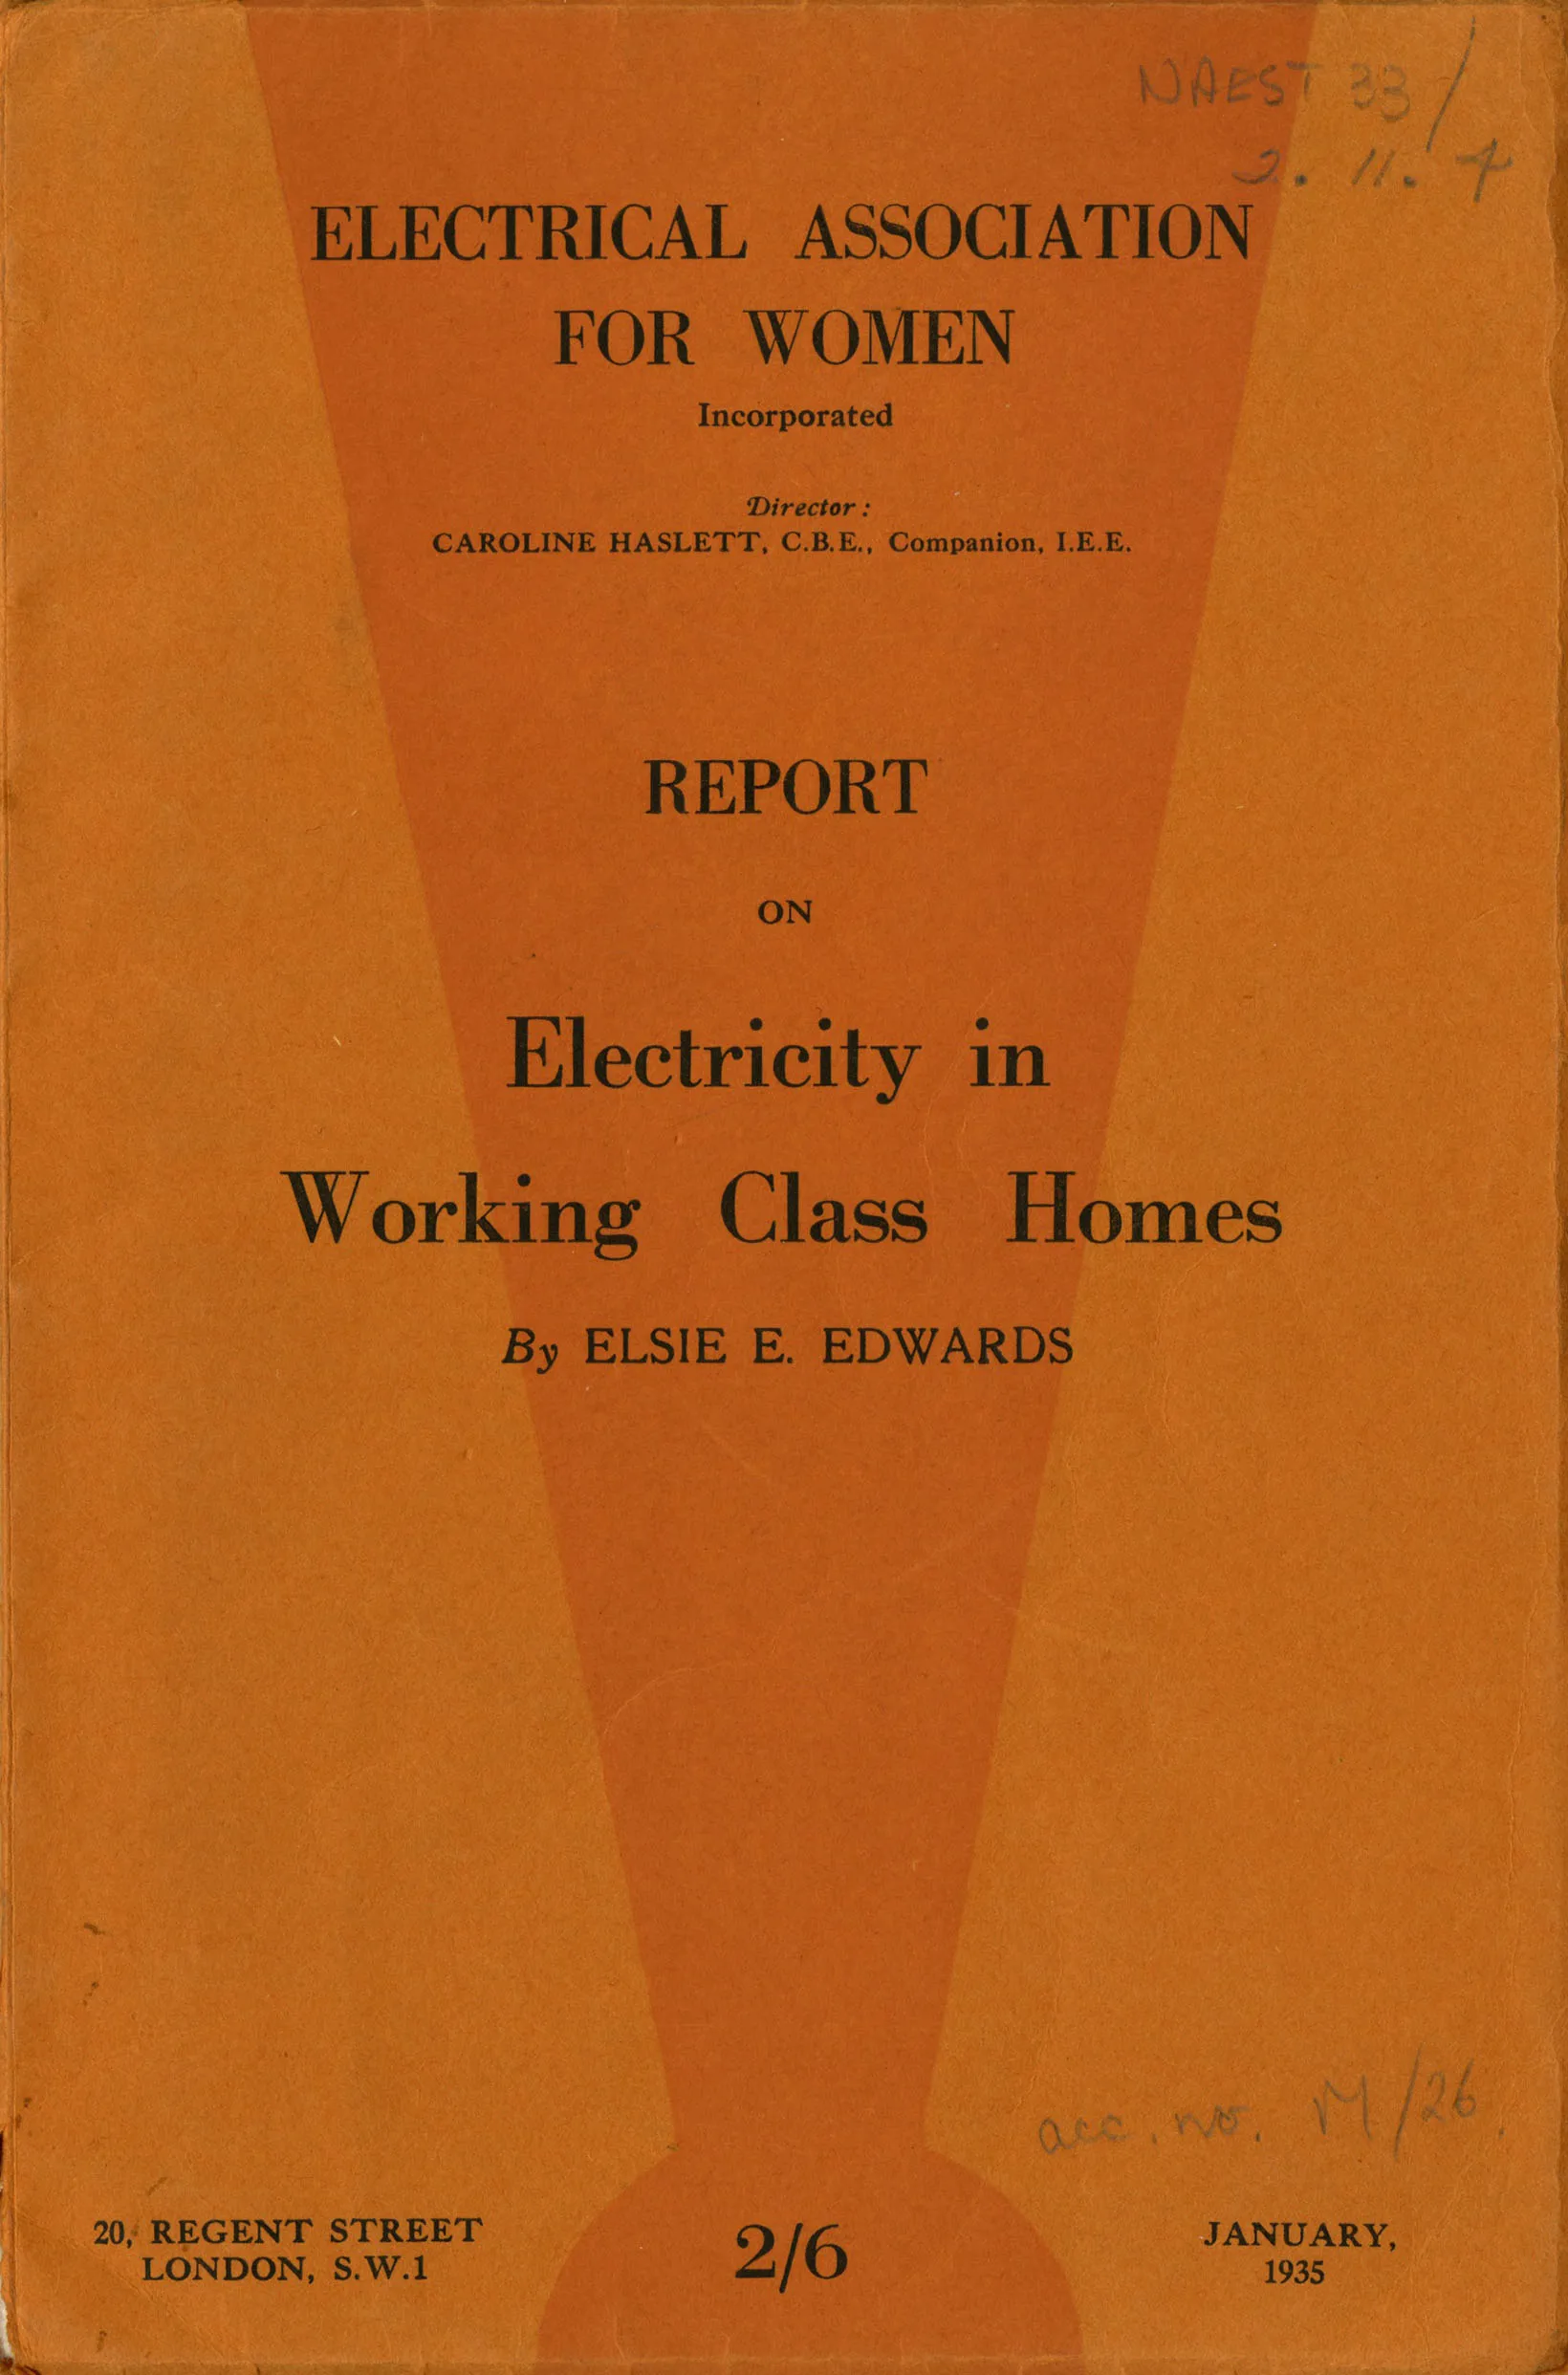 EAW 'Report on electricity in working class homes', by Elsie E Edwards 1935 IET Archives ref NAEST 33/02/11/04.